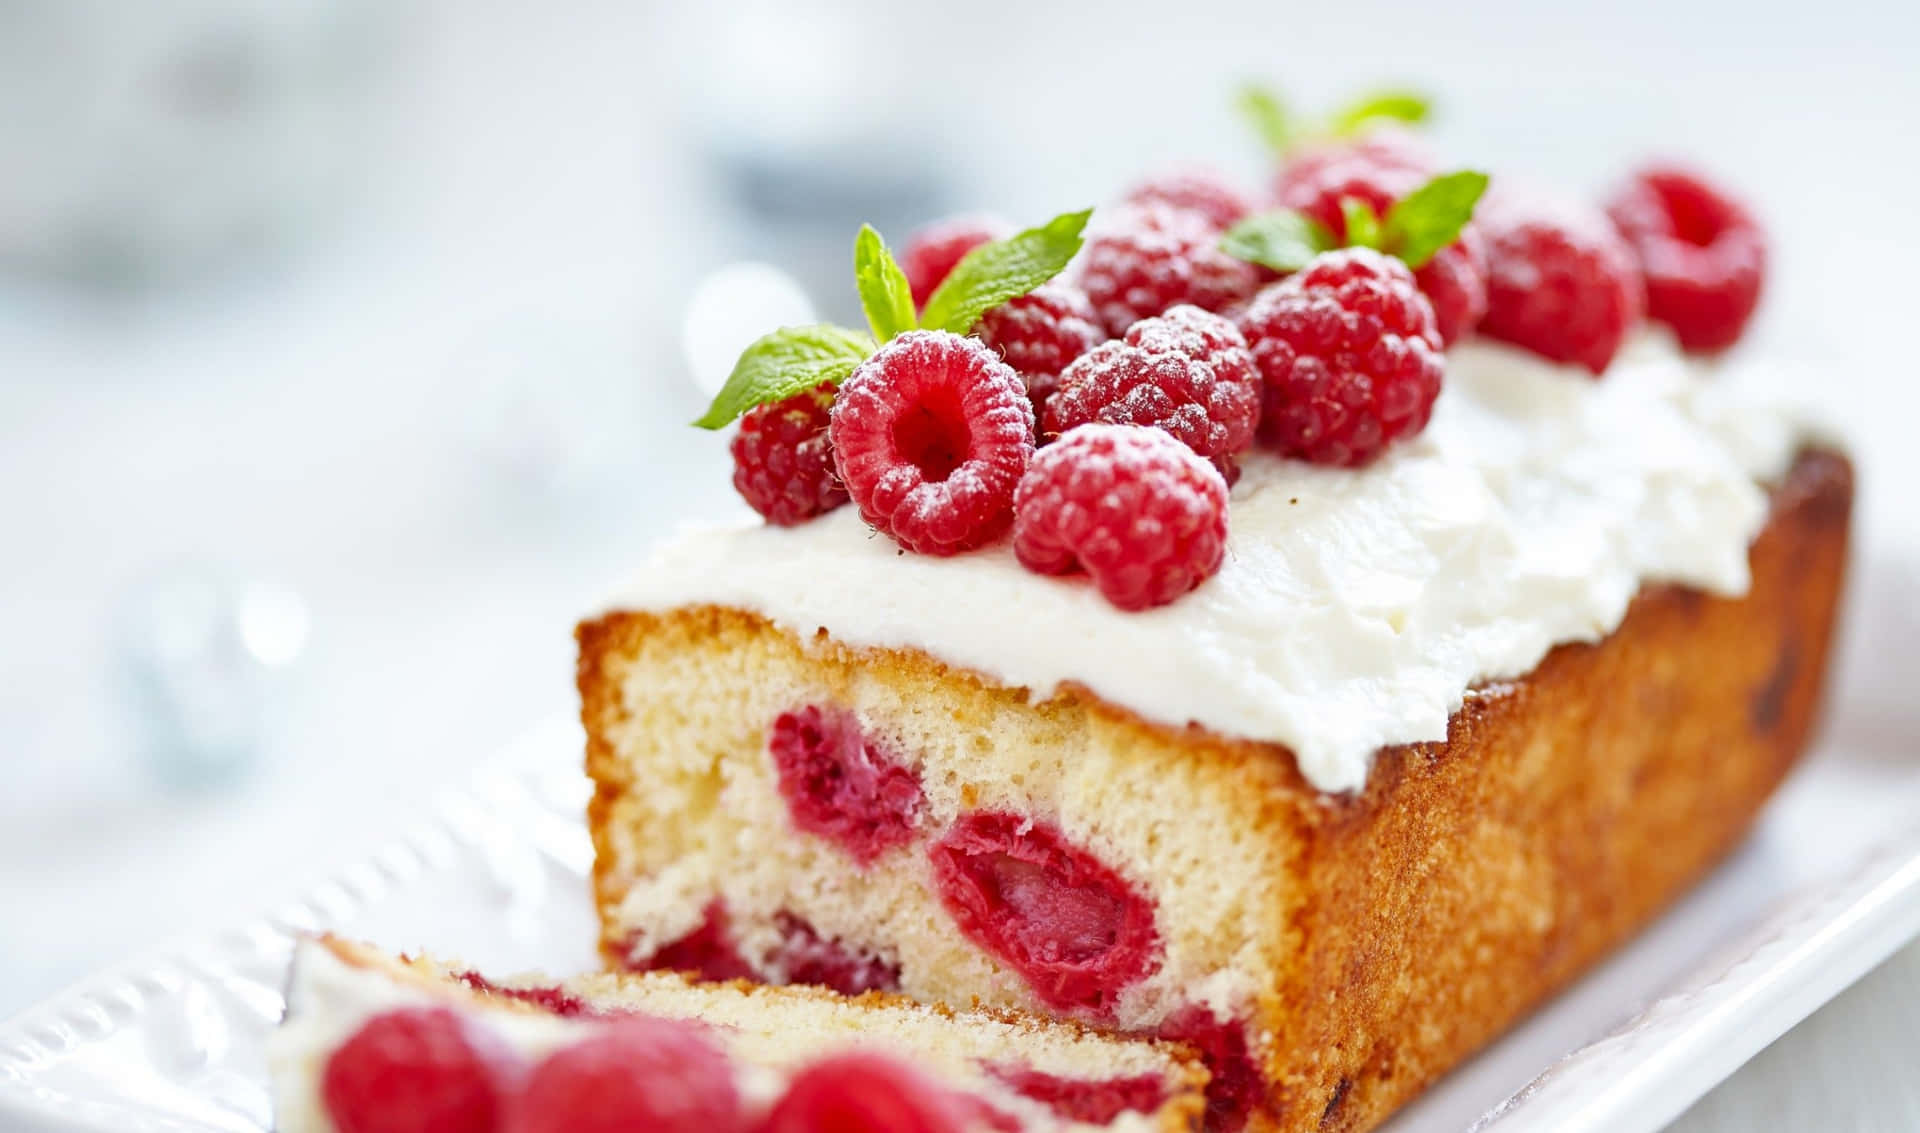 A Slice Of Raspberry Cake With Whipped Cream And Raspberries